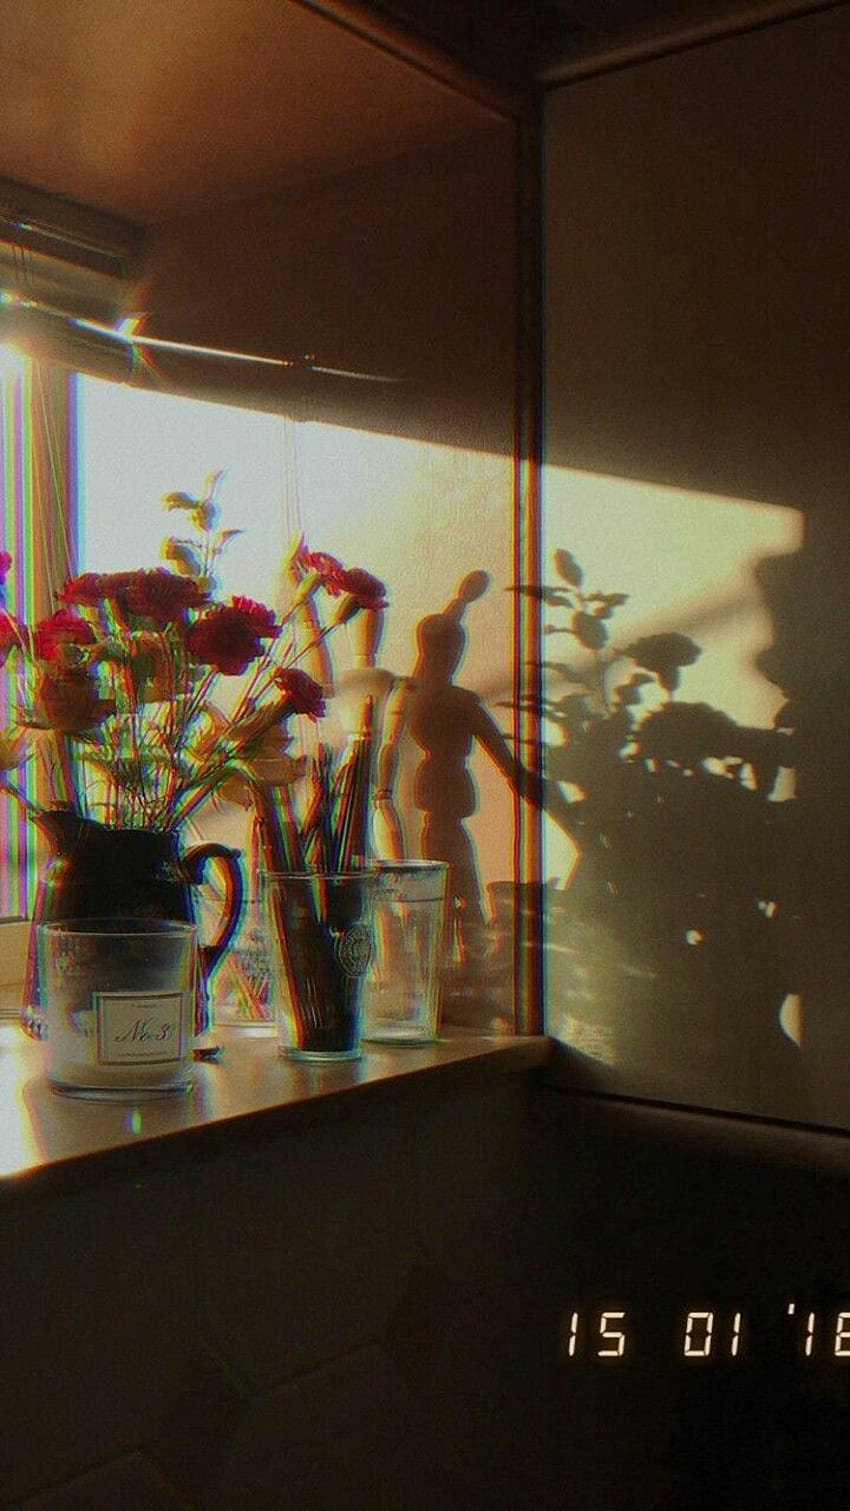 A table with a vase of flowers and a wooden doll. - Sunshine, sunlight